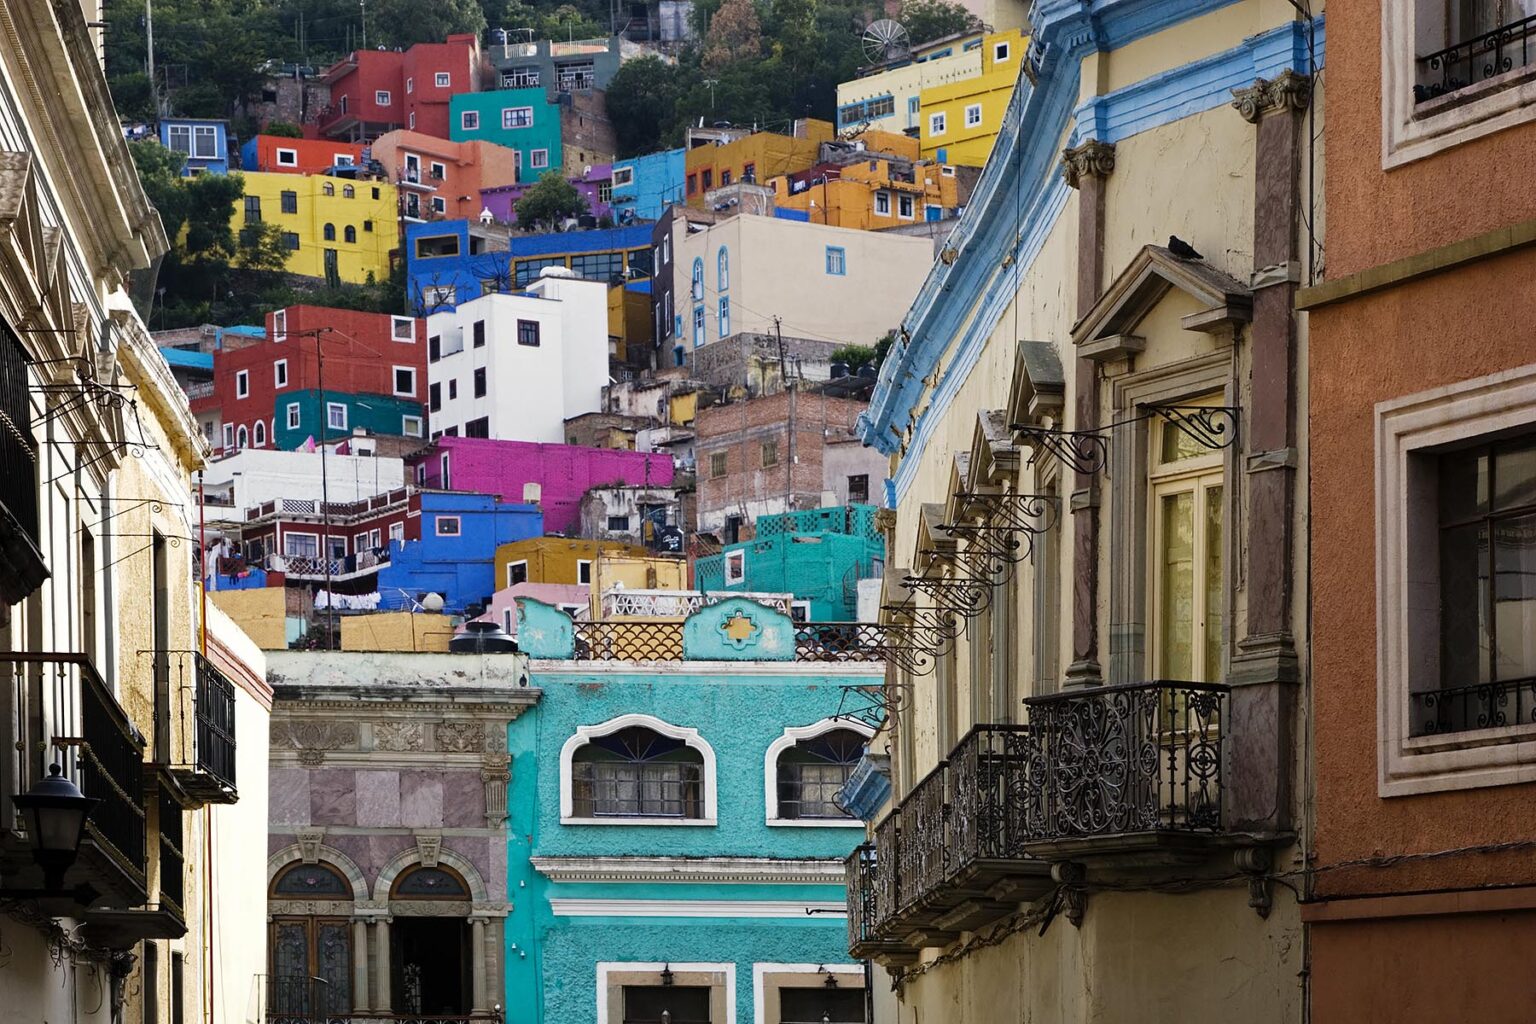 Fine quality WROUGHT IRON BALCONIES and brightly colorful HOUSES define the architectural style of the COLONIAL TOWN of GUANAJUATO - MEXICO